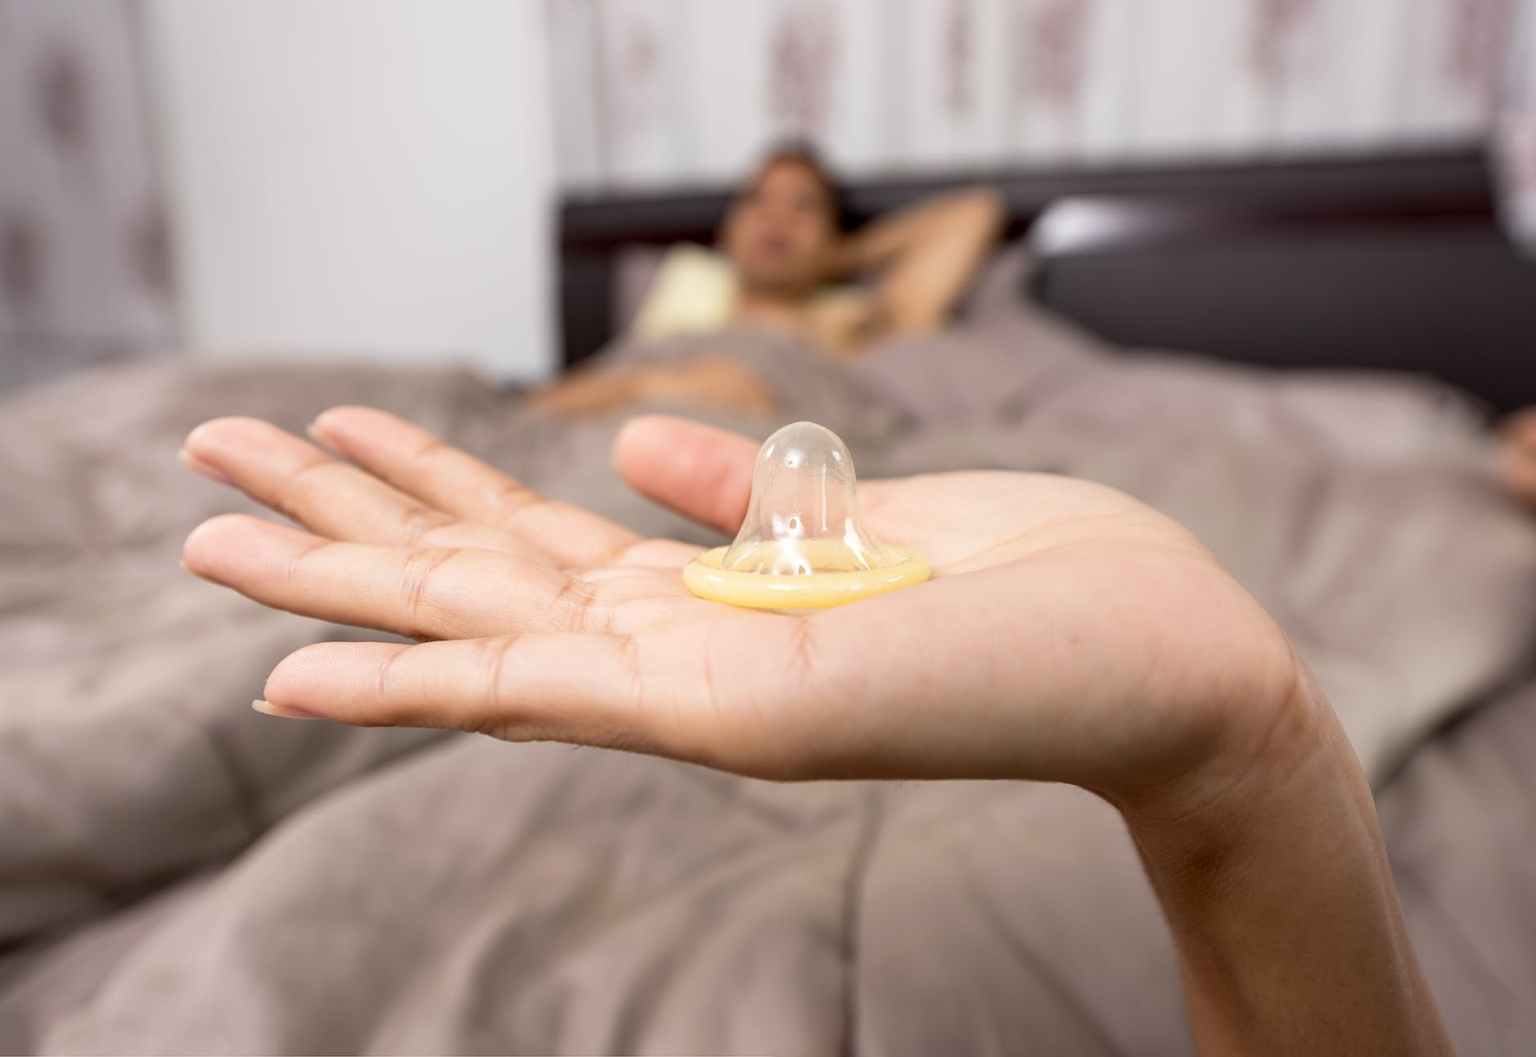 Best Condoms: Brands, Types, and Buying Guide